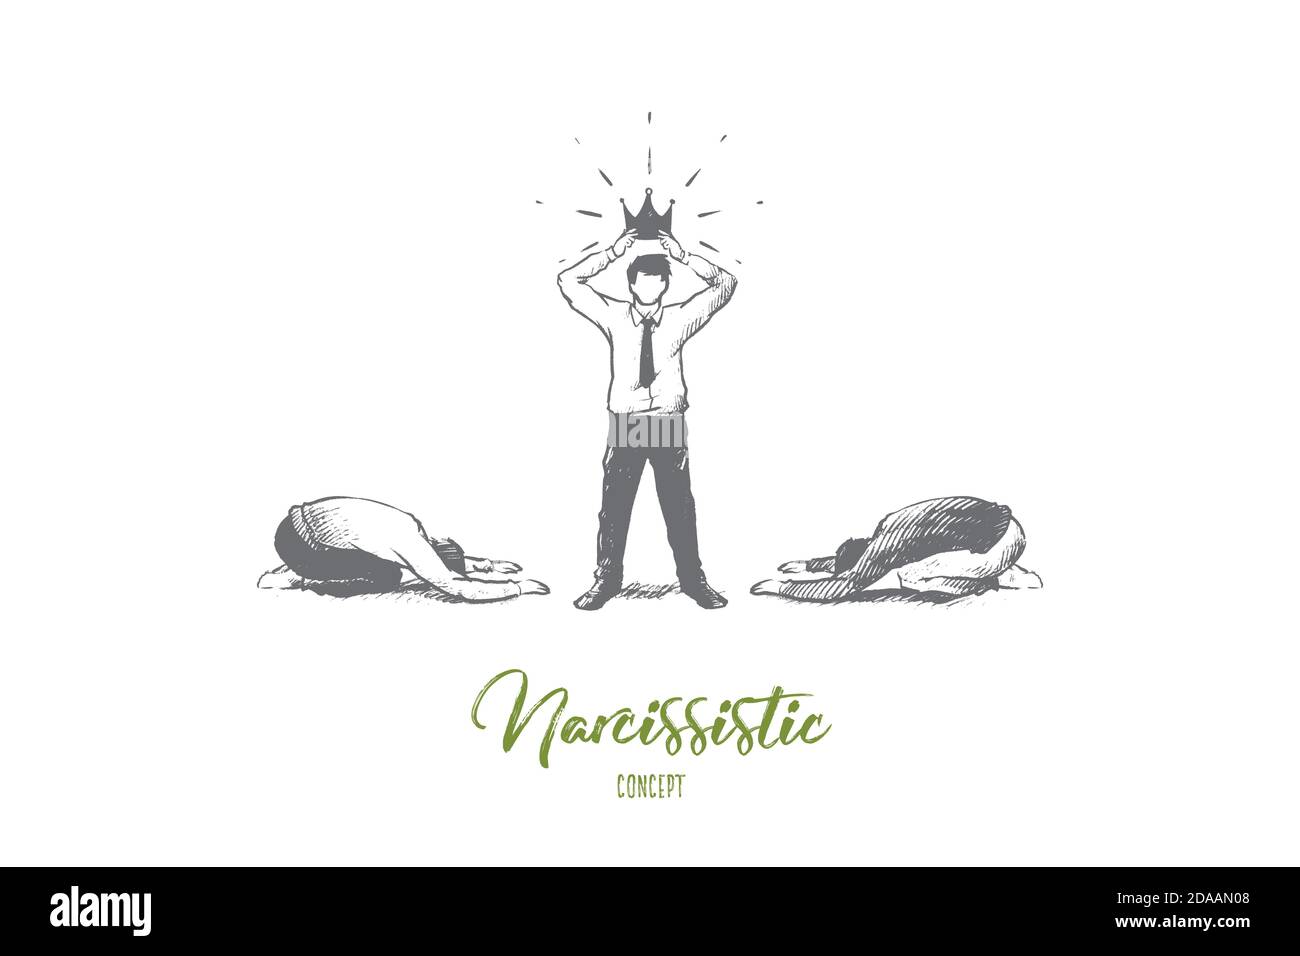 Narcissistic concept. Hand drawn isolated vector. Stock Vector